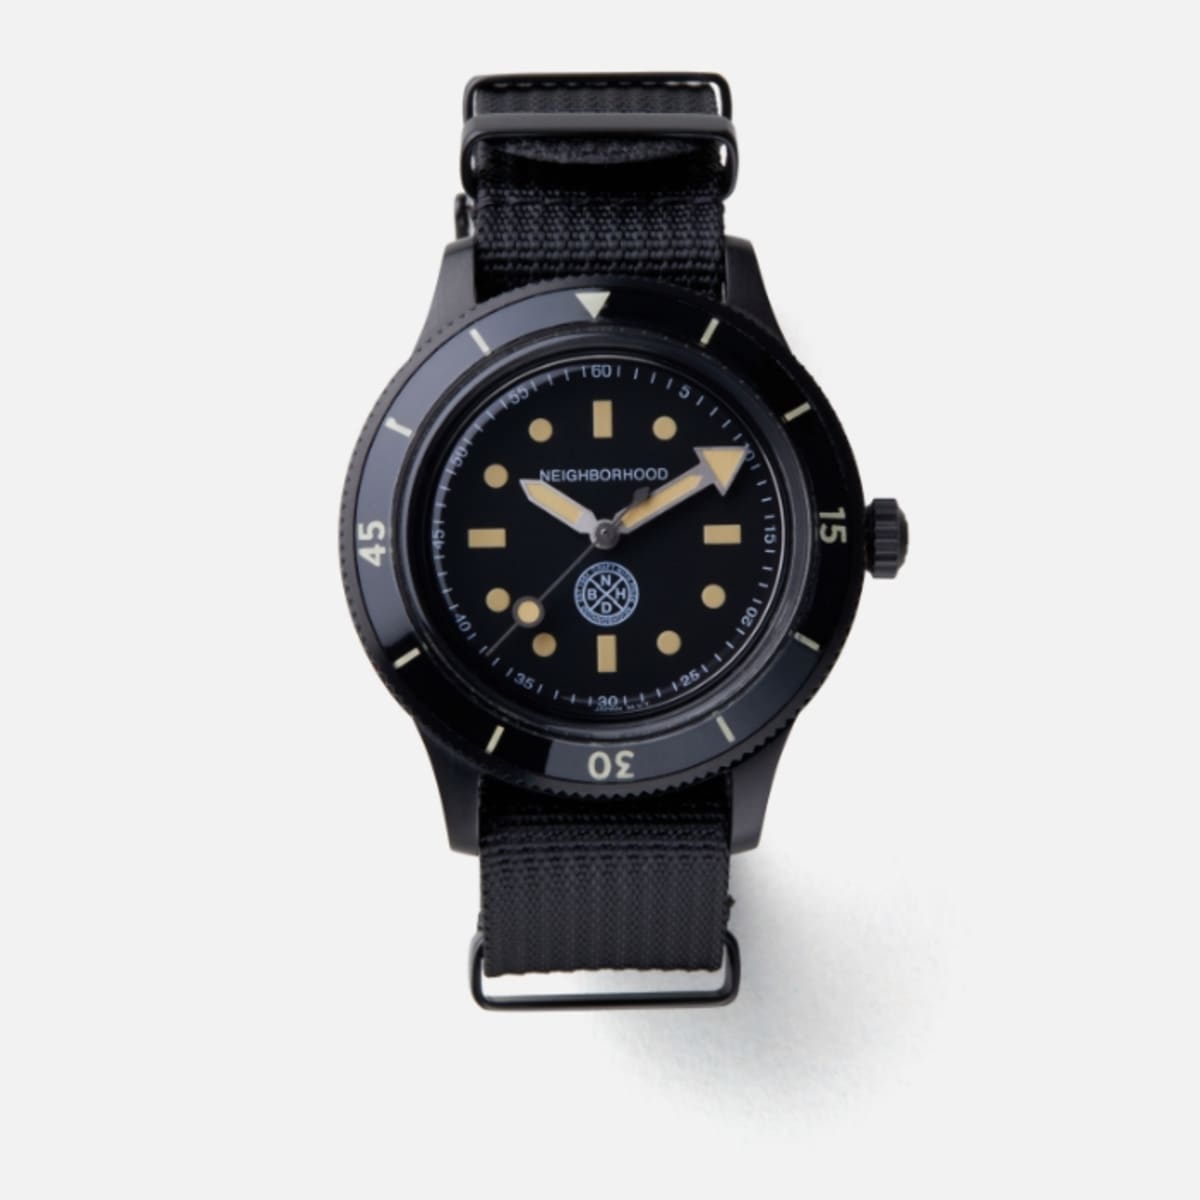 Neighborhood releases the NH Original Watch Type-1 - Acquire